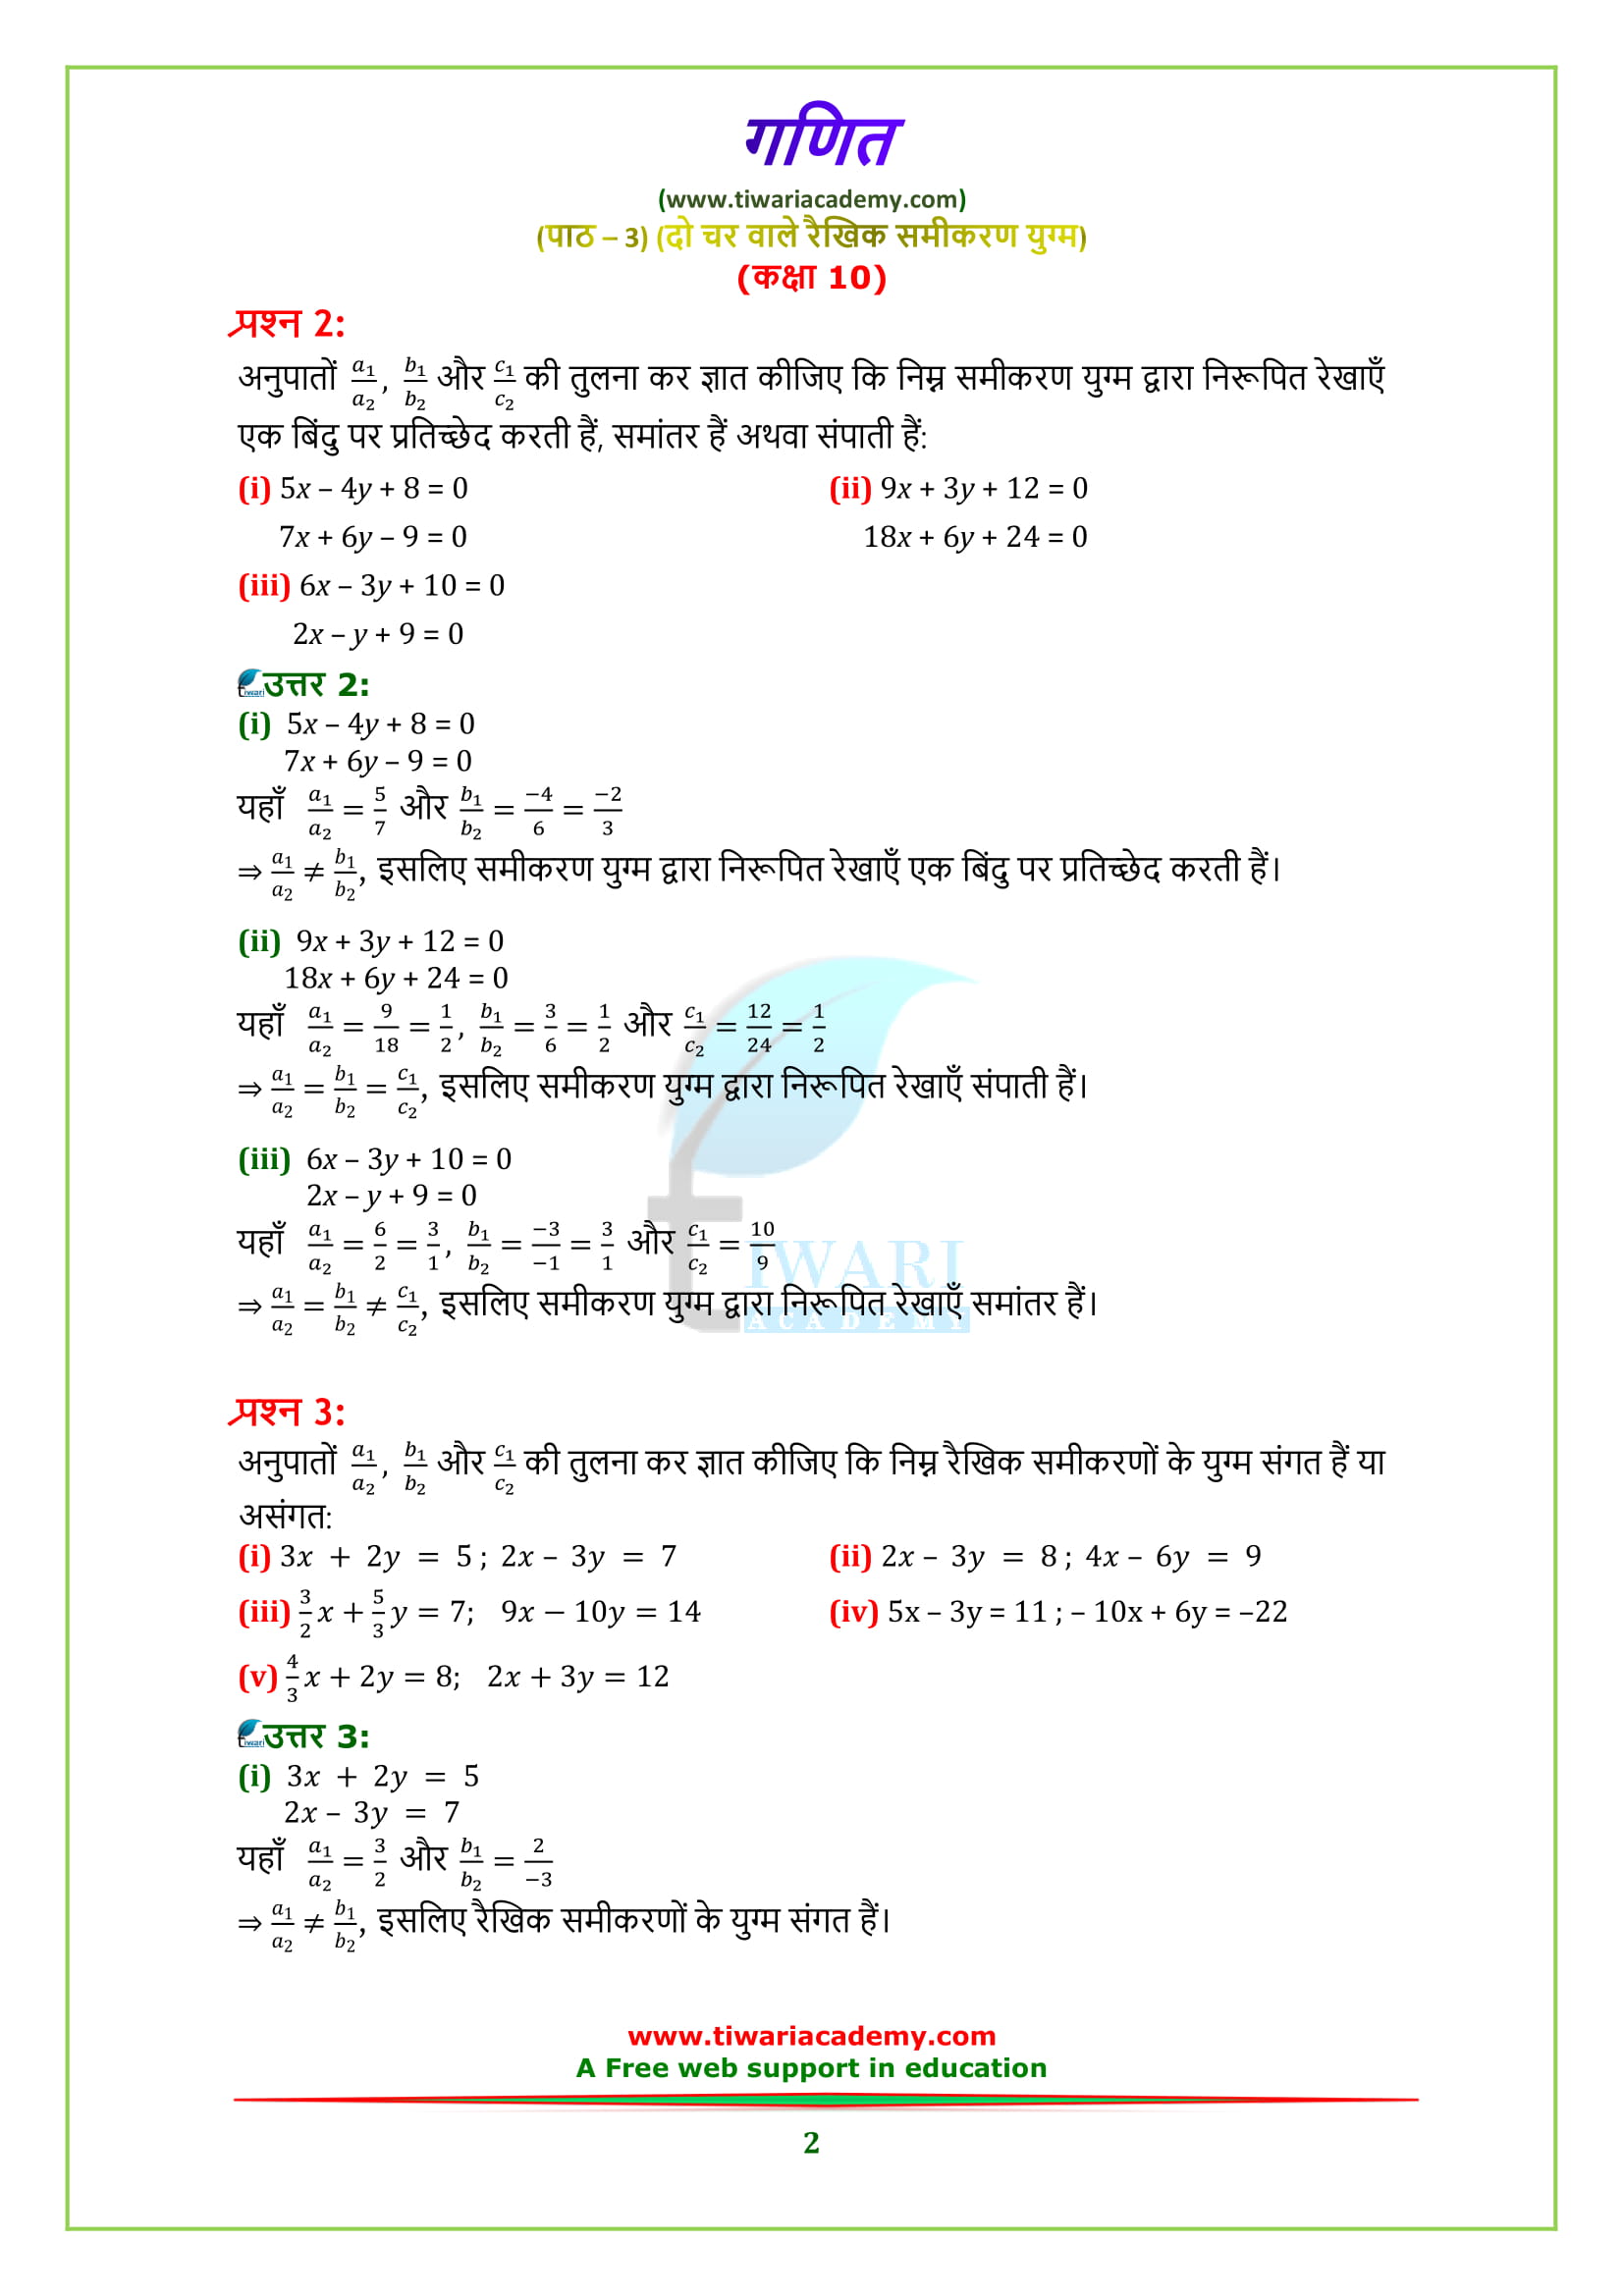 NCERT Solutions for class 10 Maths Chapter 3 Exercise 3.2 in Hindi Medium